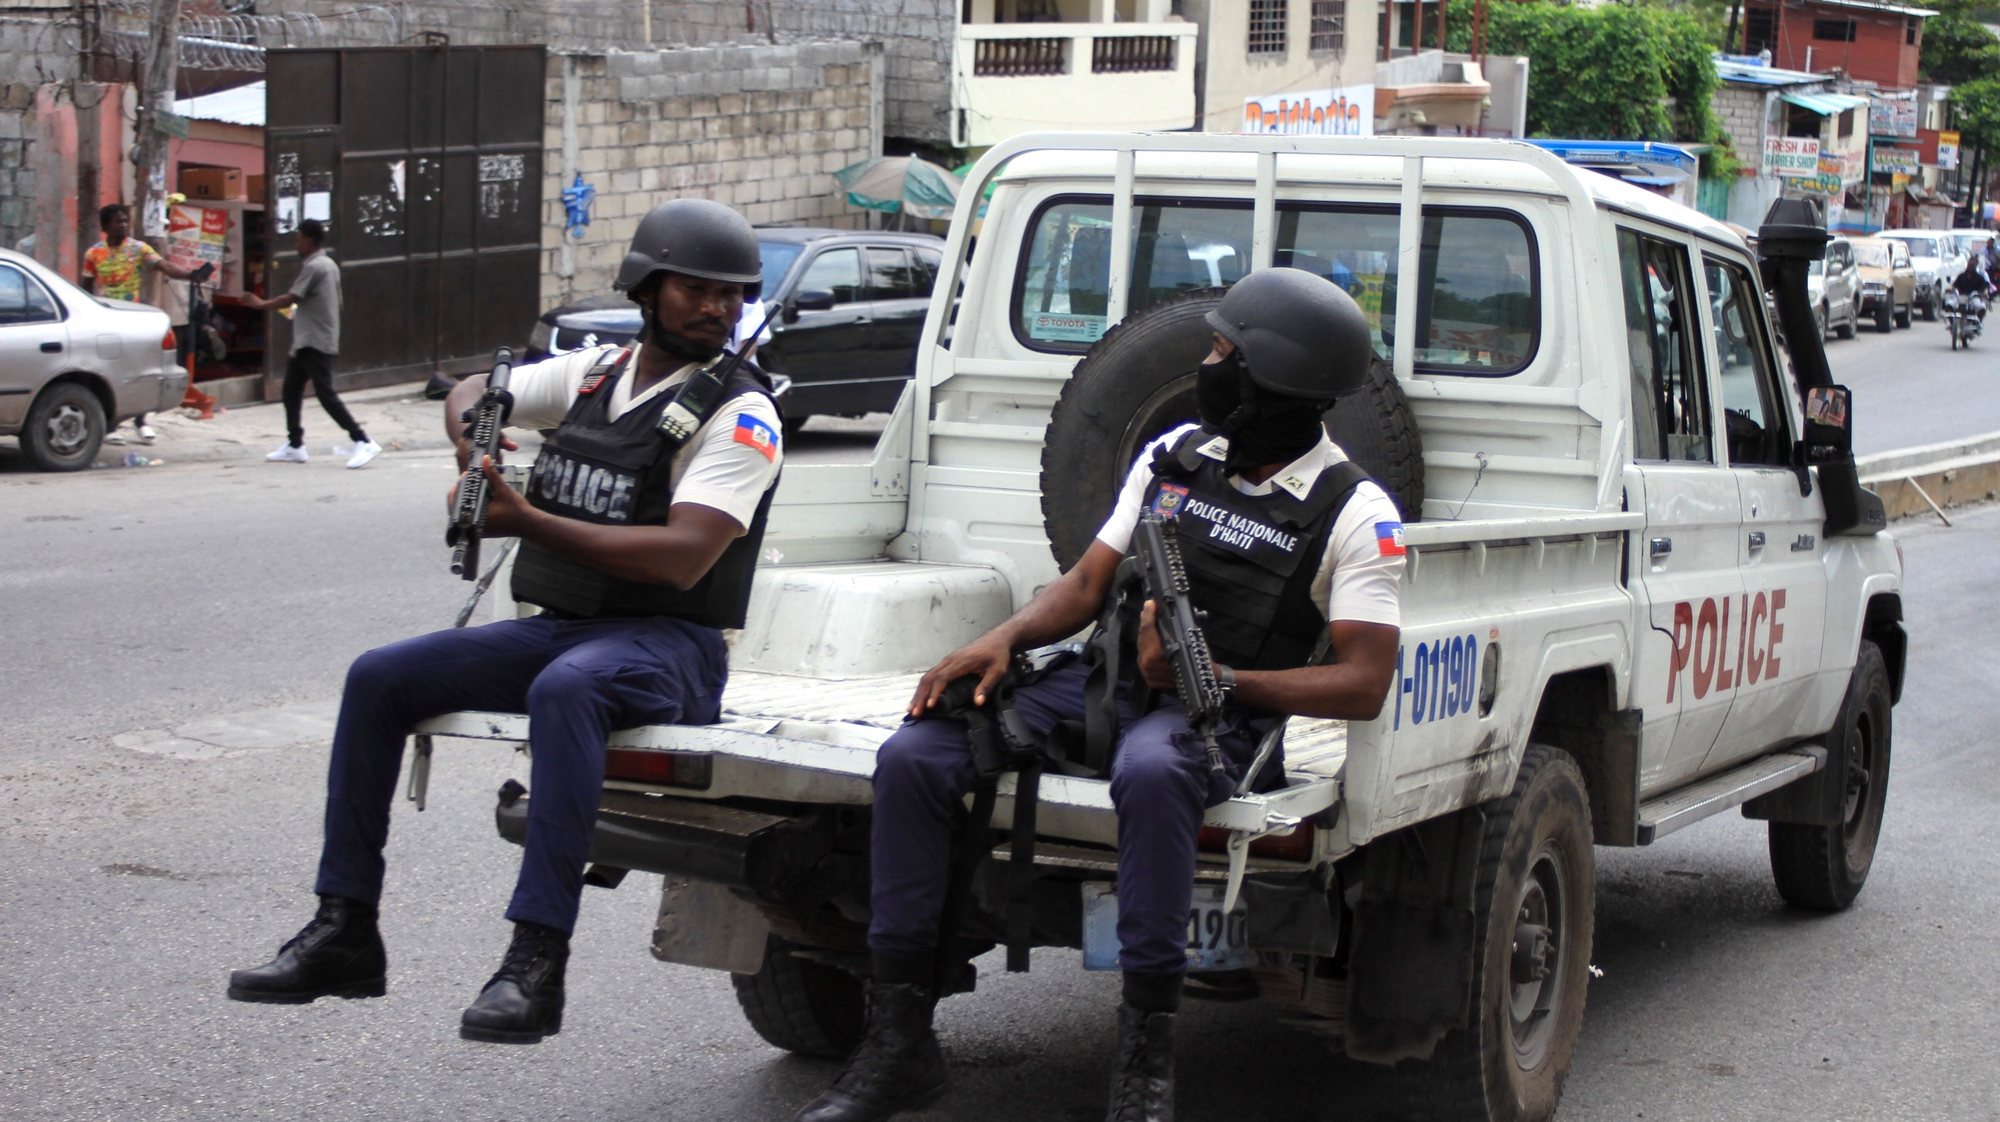 epa10593566 Police officers patrol a street amid widespread insecurity, in Port-au-Prince, Haiti, 26 April 2023. Insecurity in Haiti, which has intensified in recent weeks as armed gangs fight for control, was the subject of a UN Security Council briefing on 26 April.  EPA/Dorcin Lesly